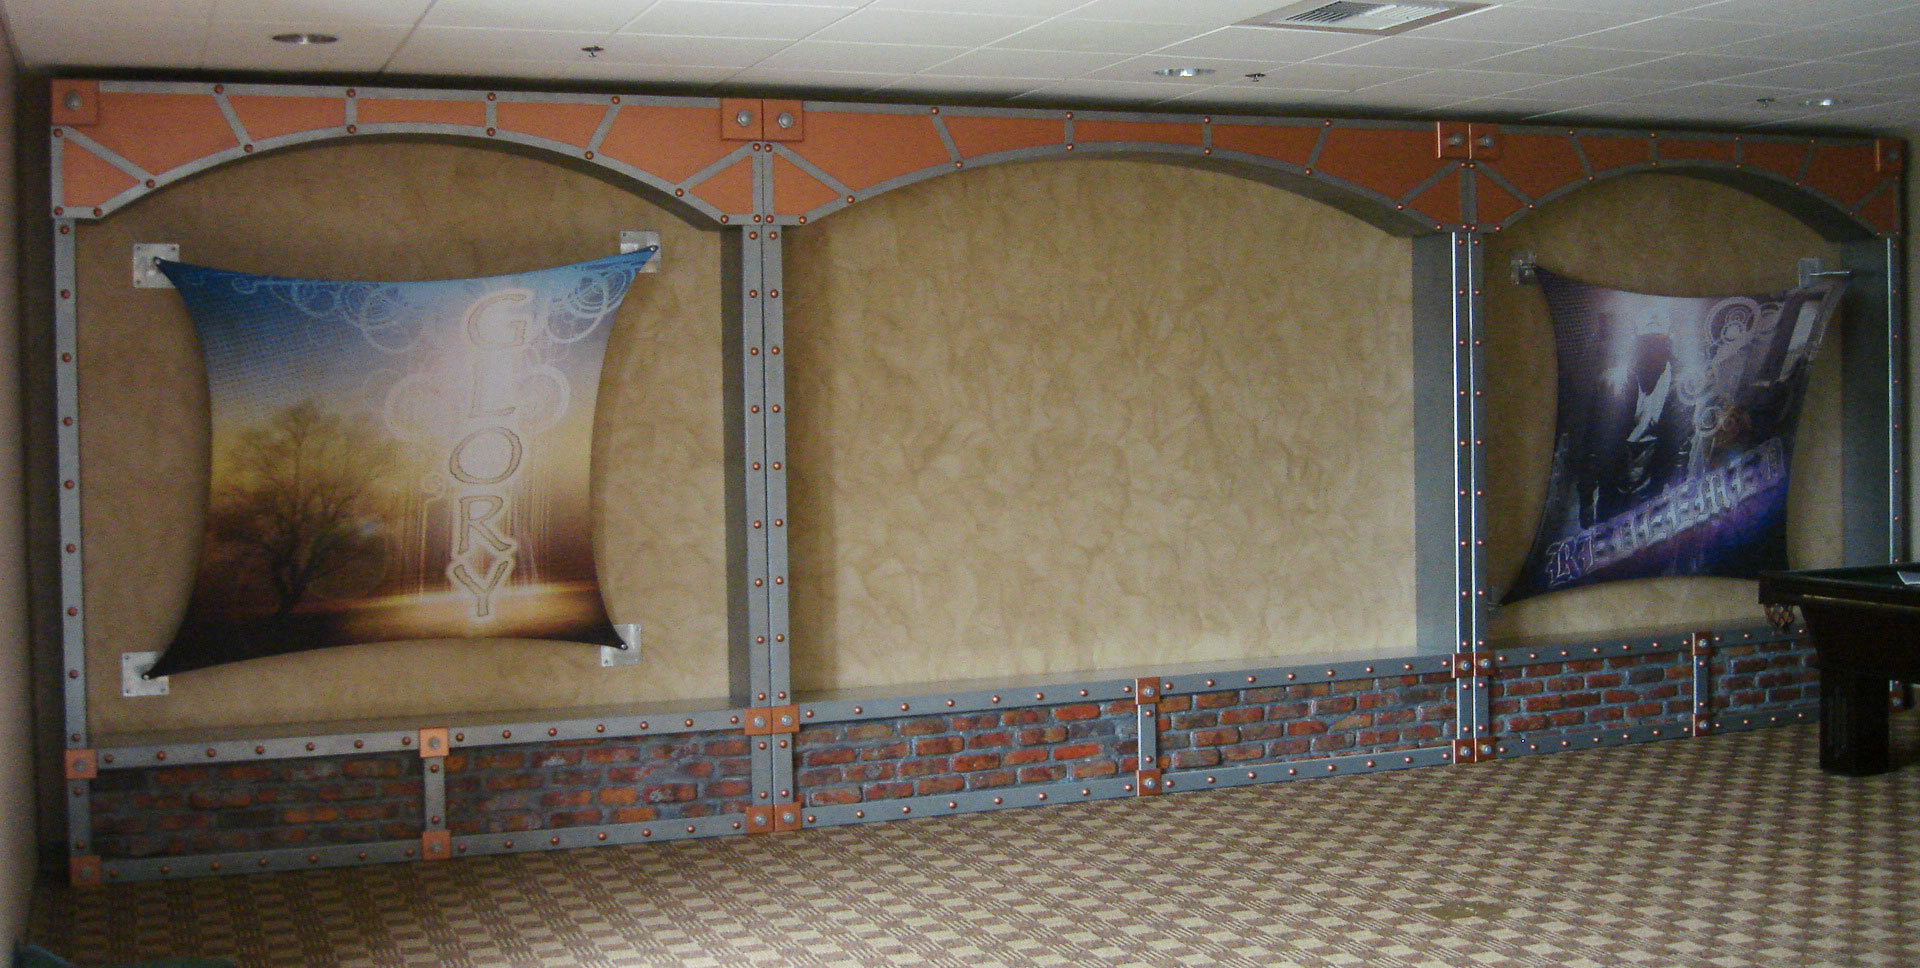 Sculpted wainscot facade of faux brick and steel with 2 Edgy Youth Stretched Canvas Sound Panels